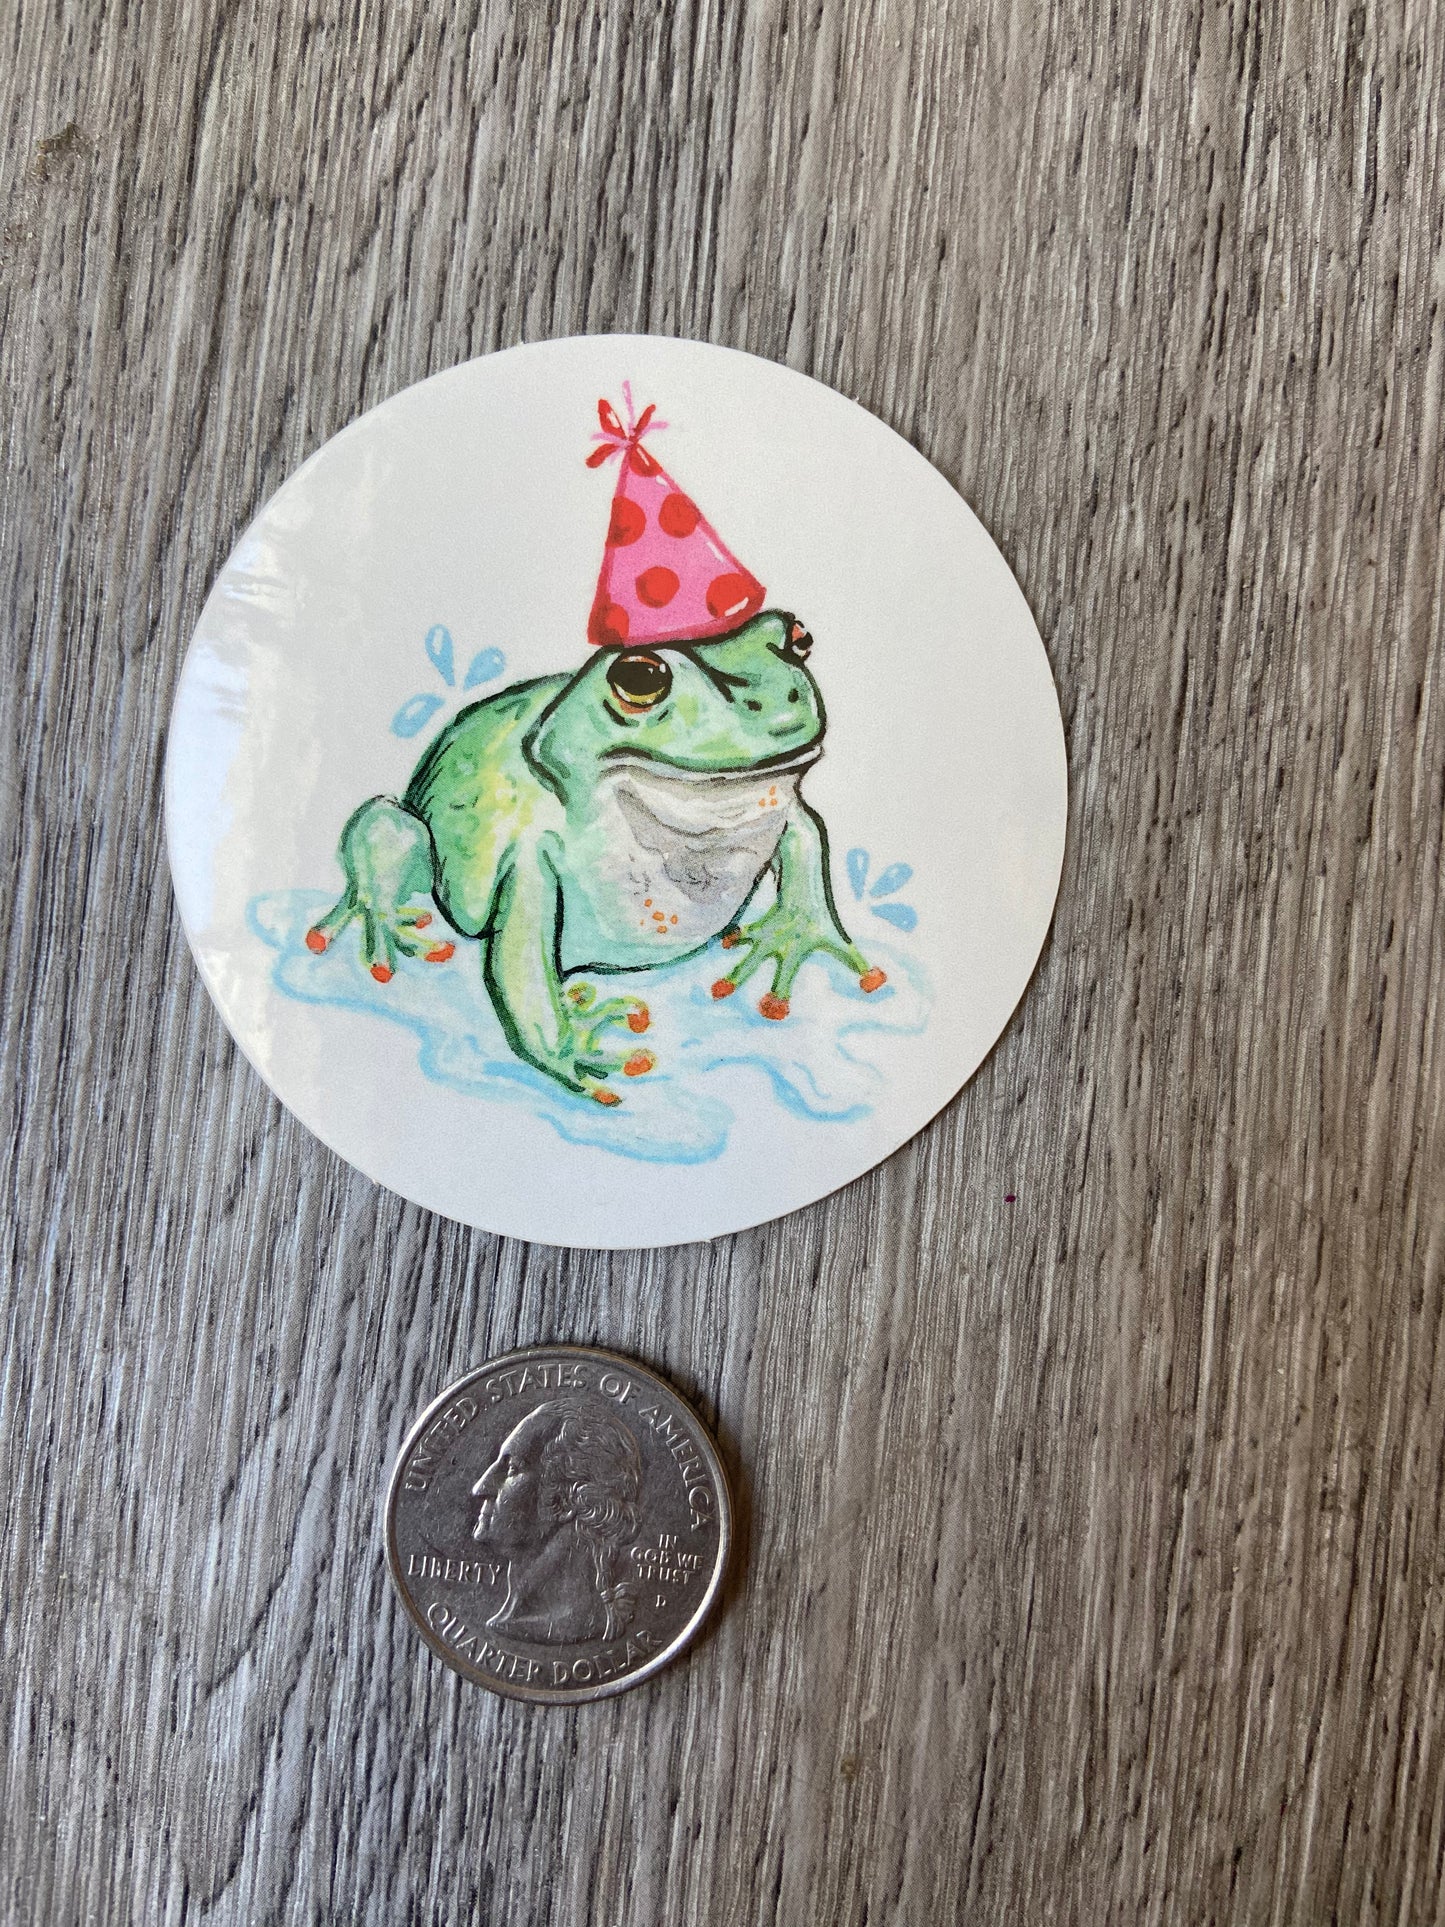 Party frog!